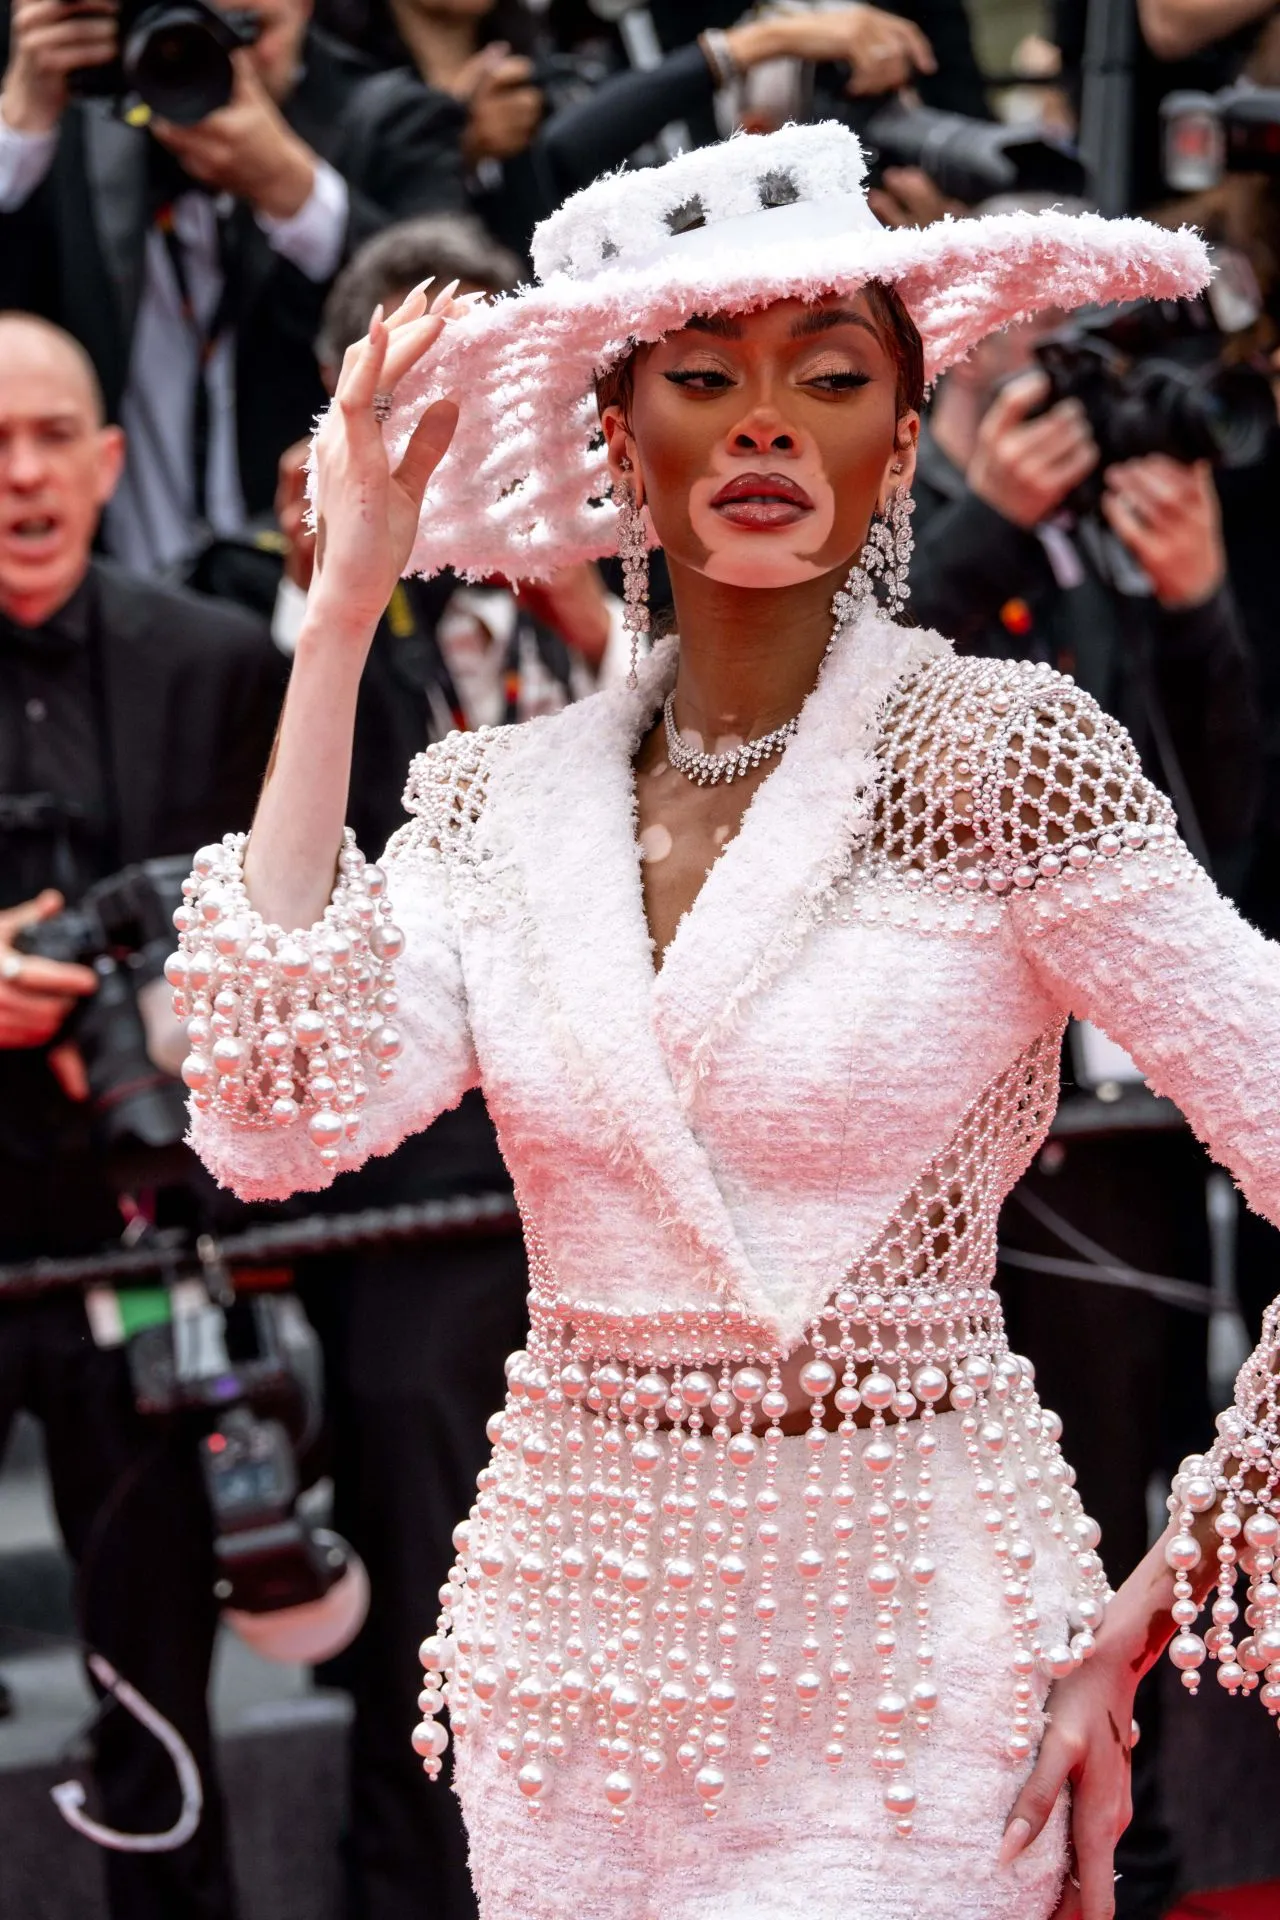 WINNIE HARLOW AT THE APPRENTICE PREMIERE AT CANNES FILM FESTIVAL7